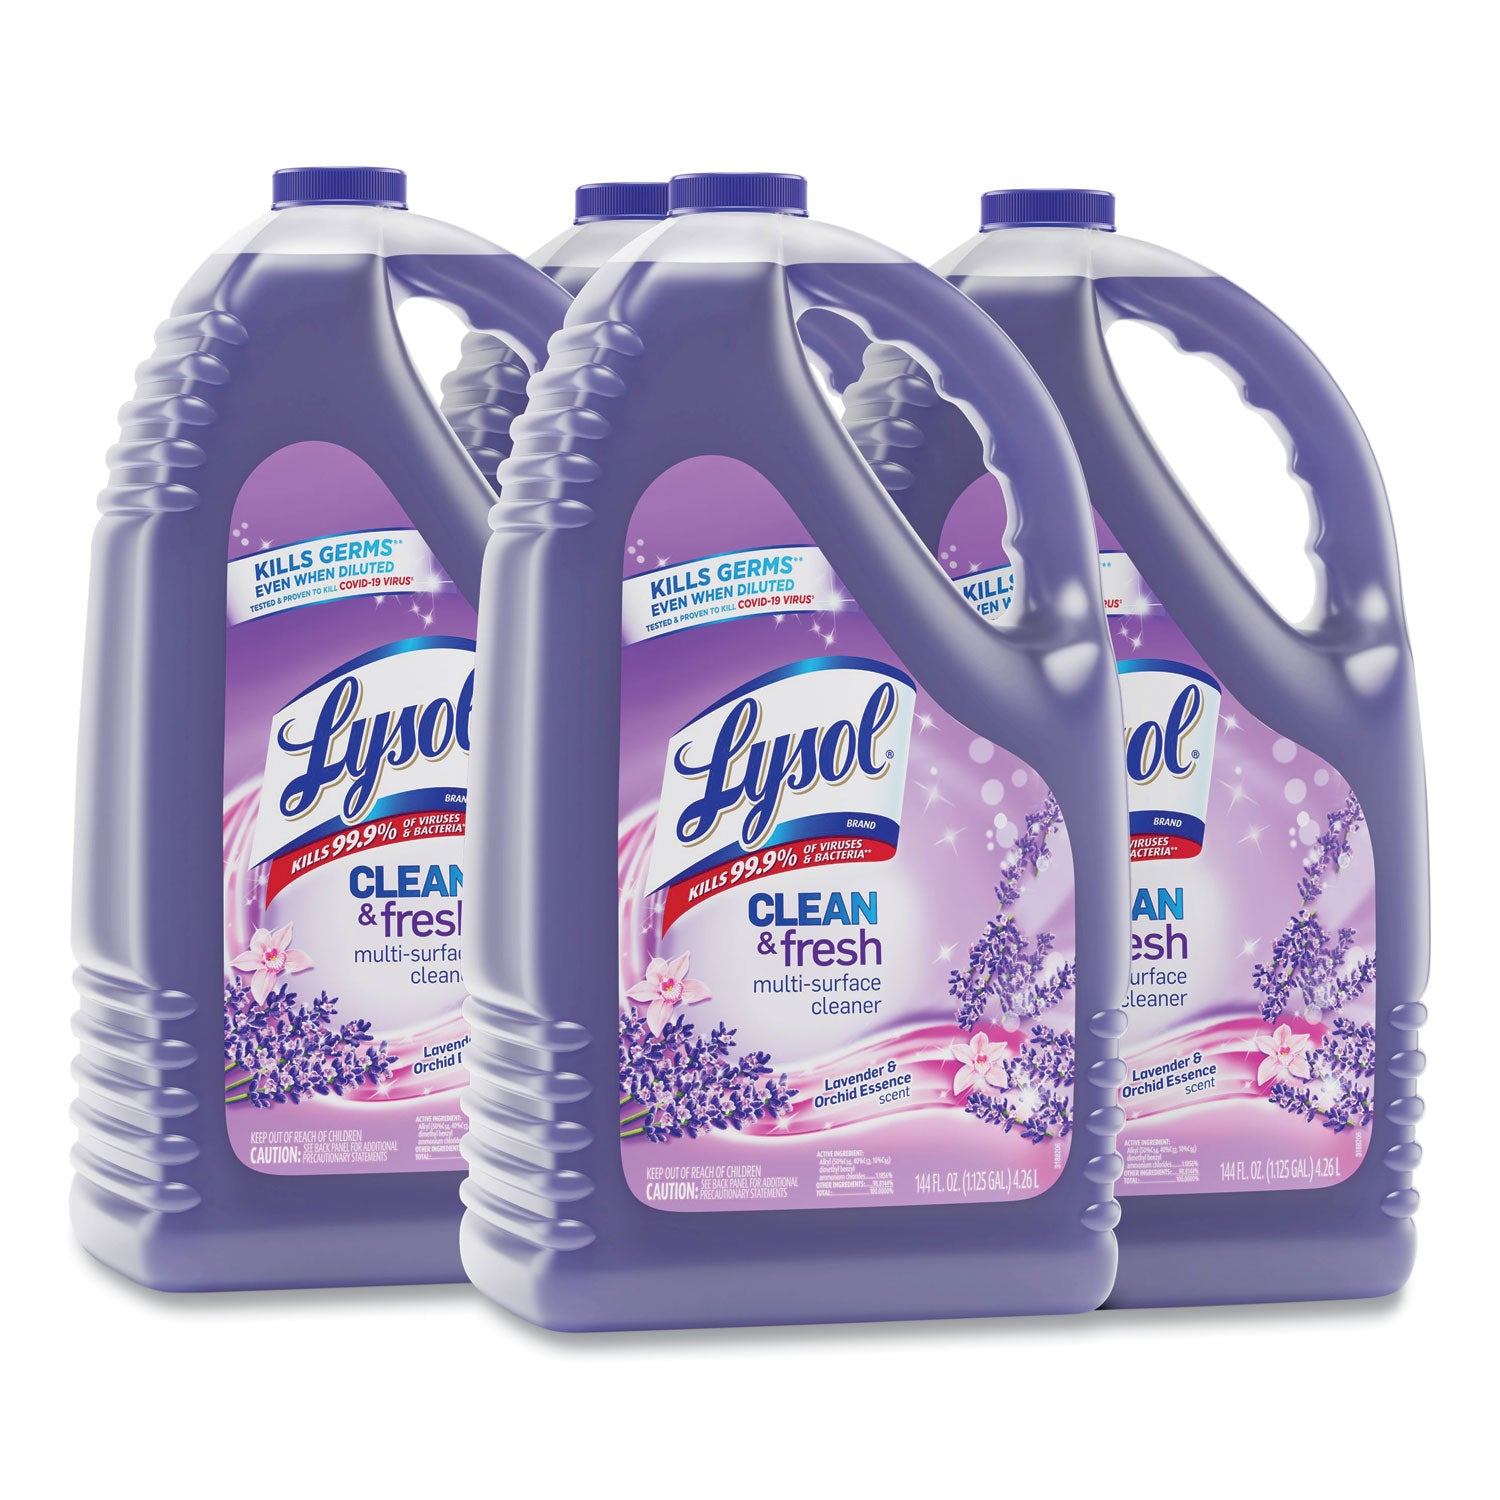 clean-and-fresh-multi-surface-cleaner-lavender-and-orchid-essence-144-oz-bottle-4-carton_rac88786 - 1